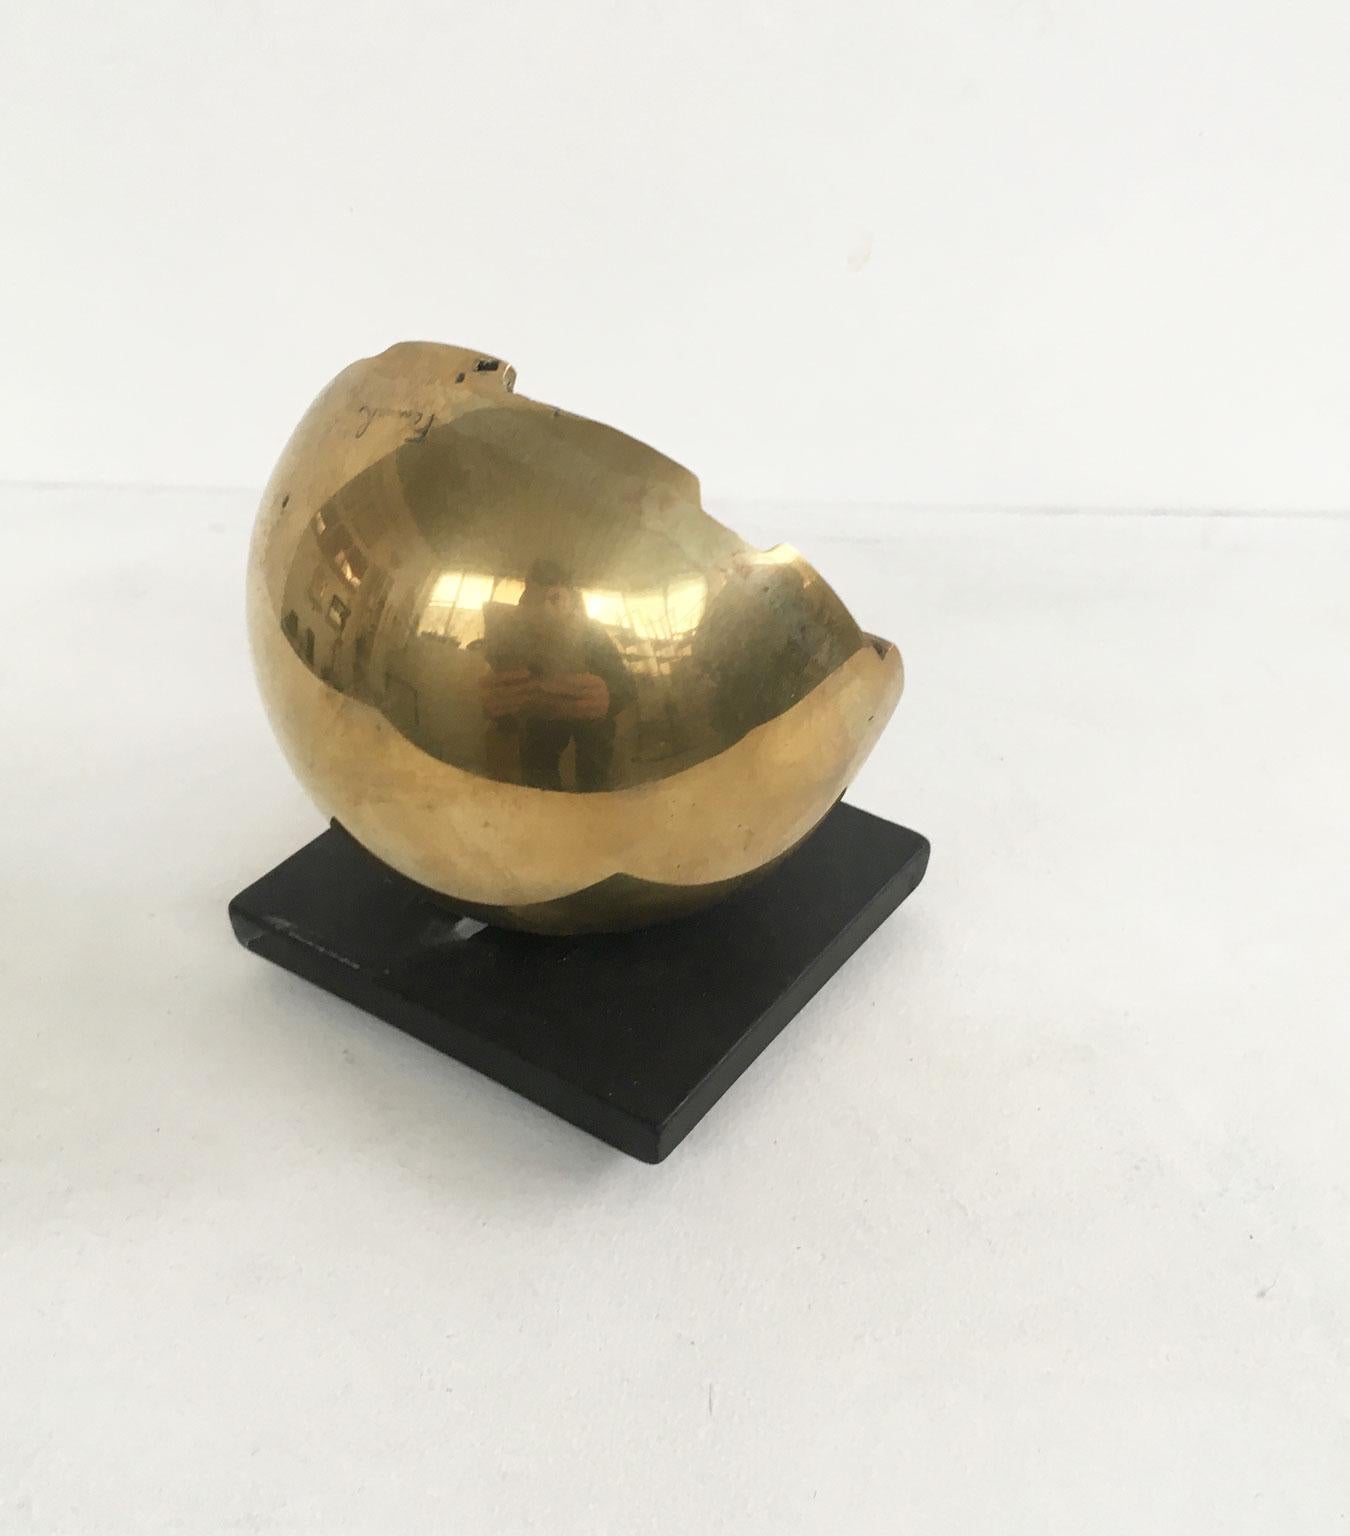 1978 Italy Bronze Abstract Sculpture by Fanna Roncoroni Labirinto Labyrinth For Sale 6